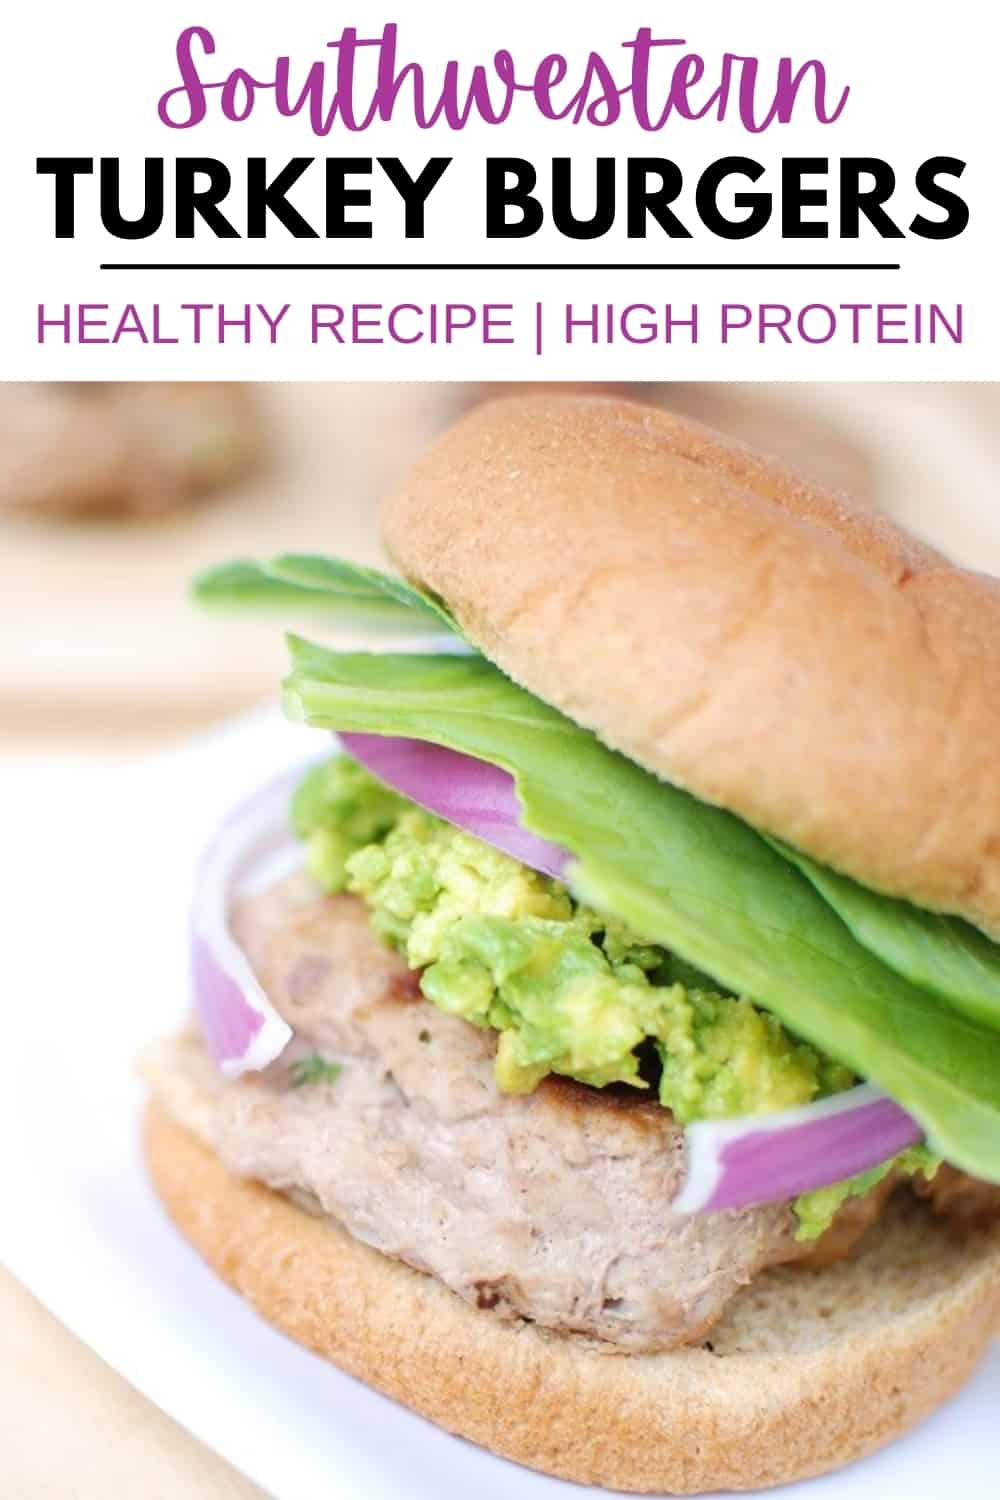 A southwestern turkey burger topped with guacamole and red onion on a whole wheat bun.